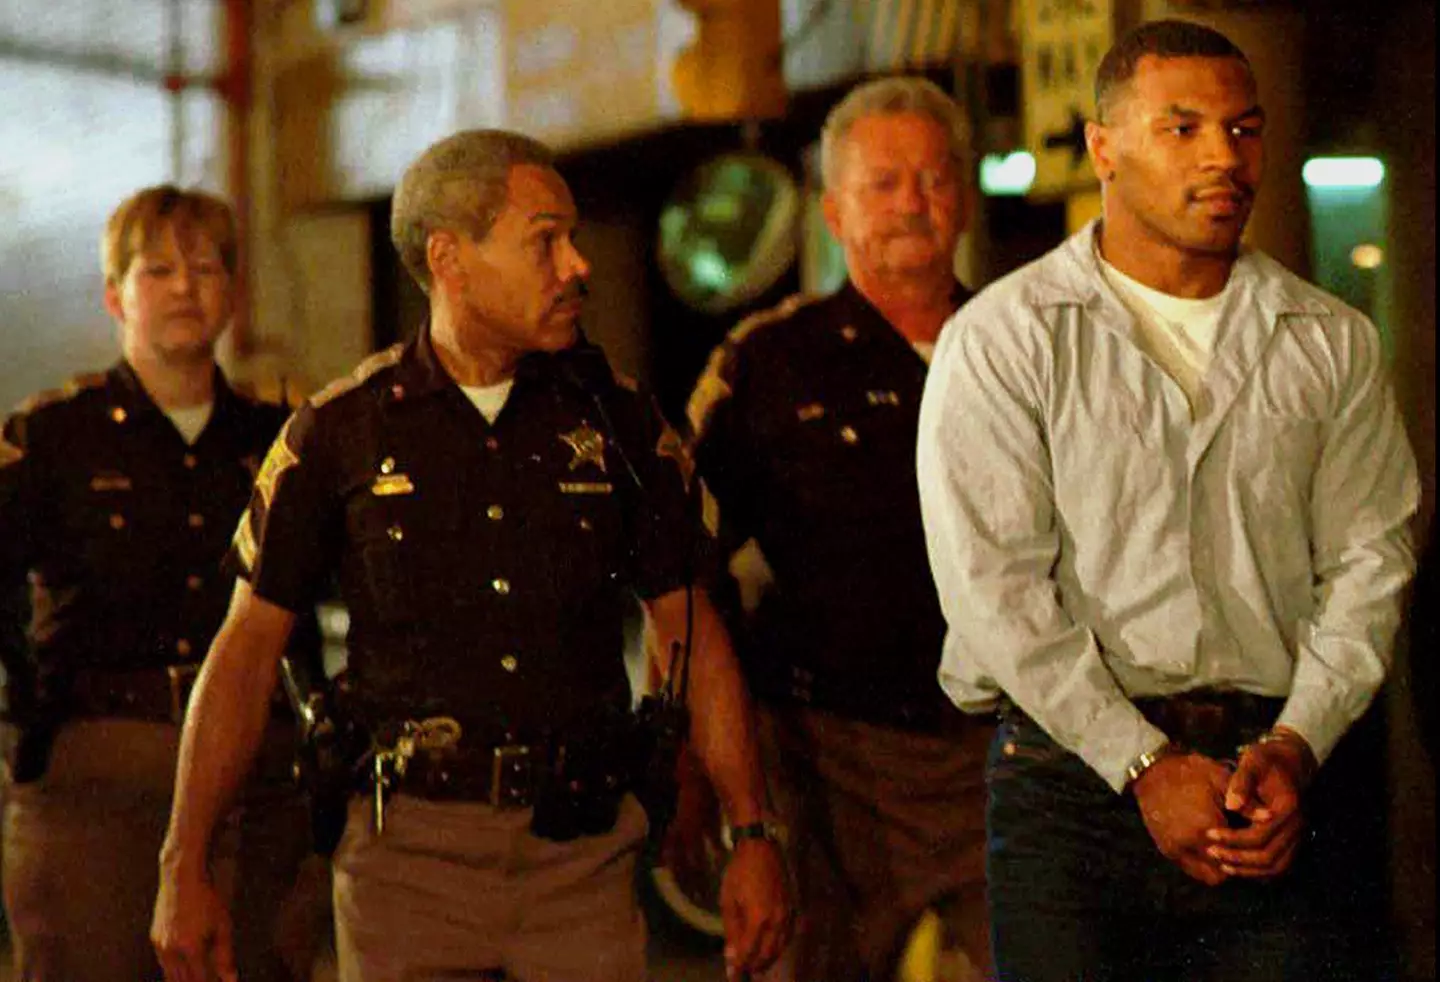 Mike Tyson in handcuffs